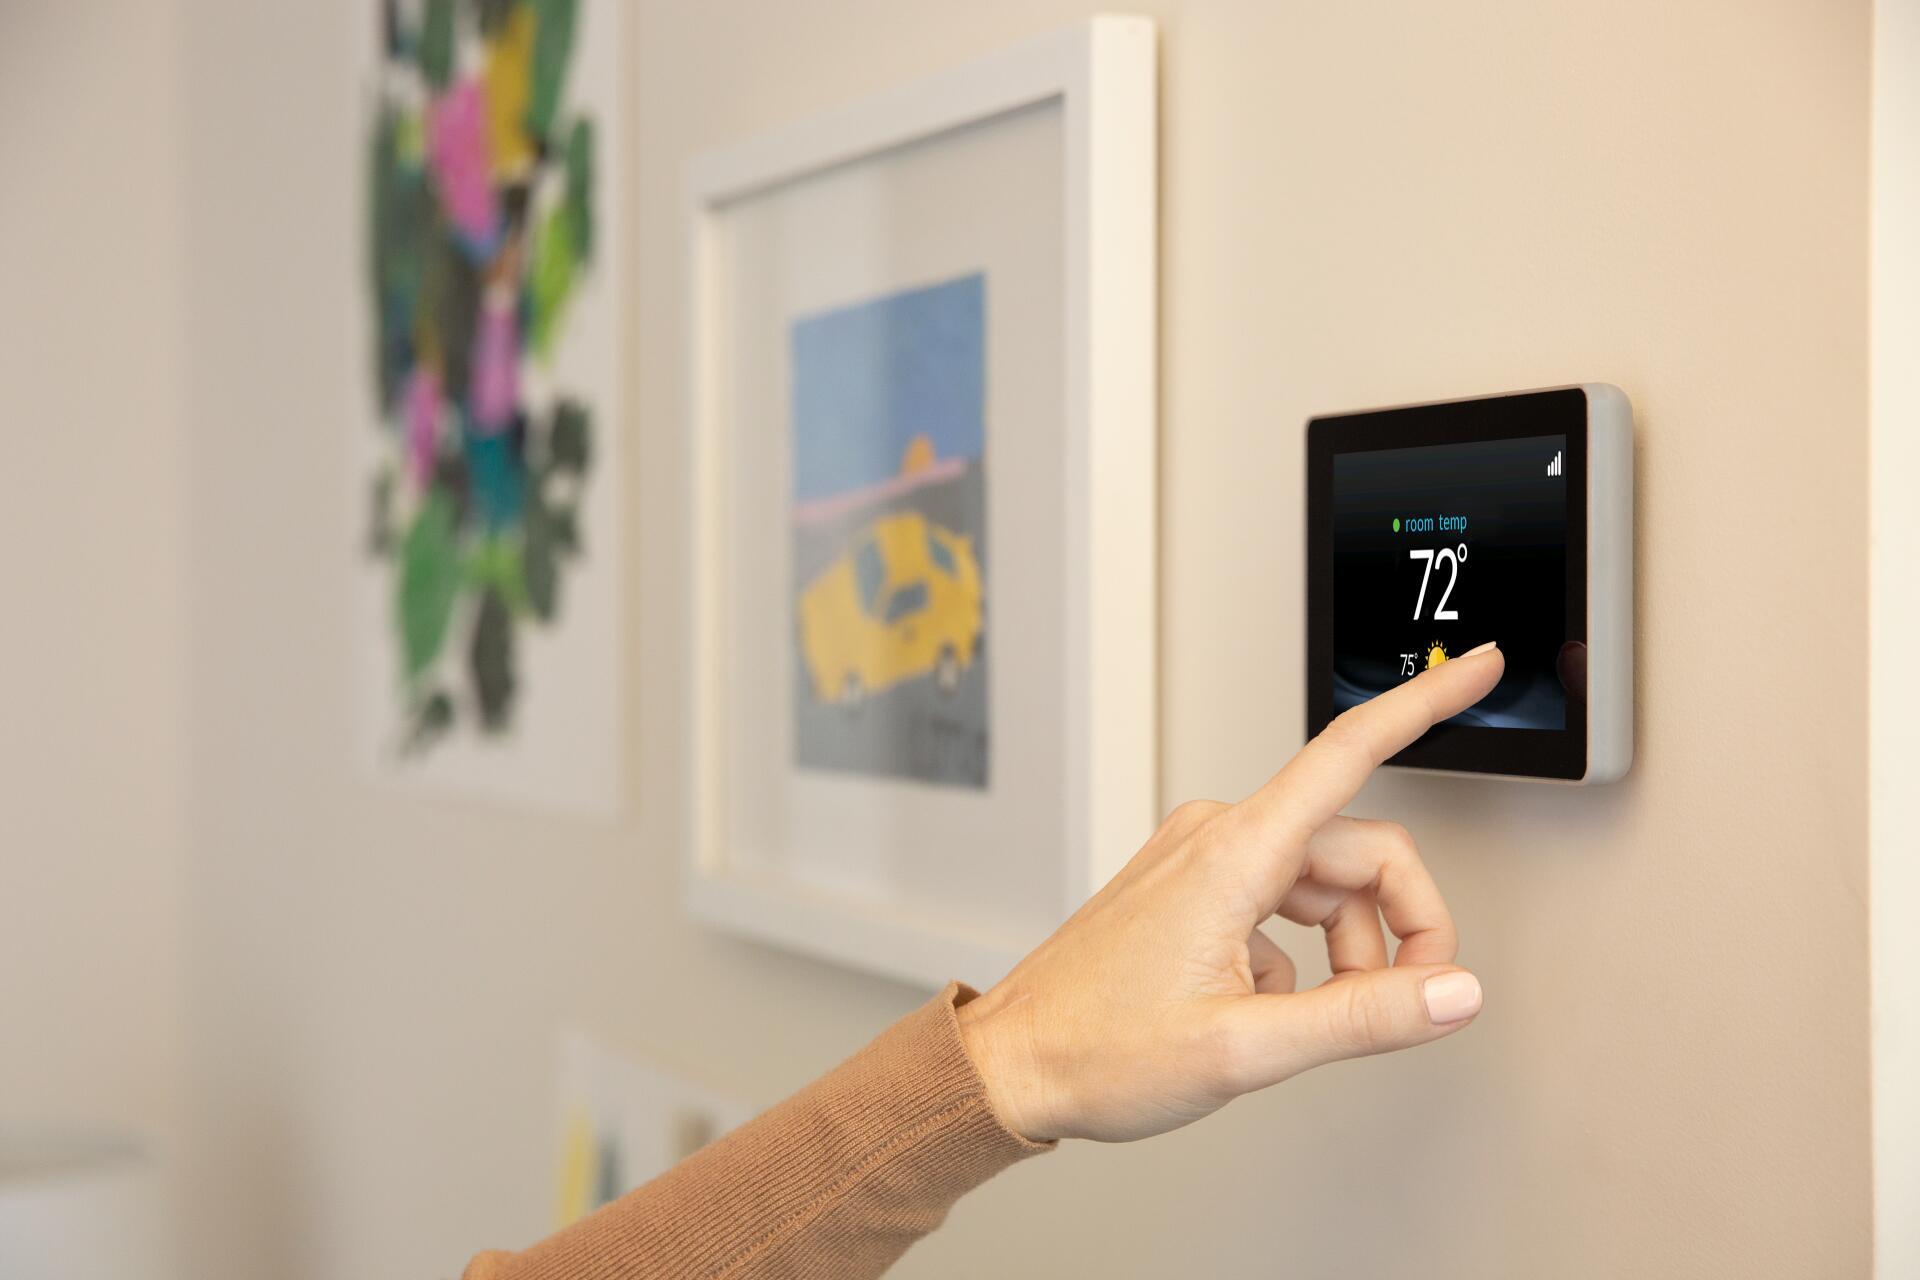 Image of a hand adjusting the heat in their home on a digital screen thermostat.